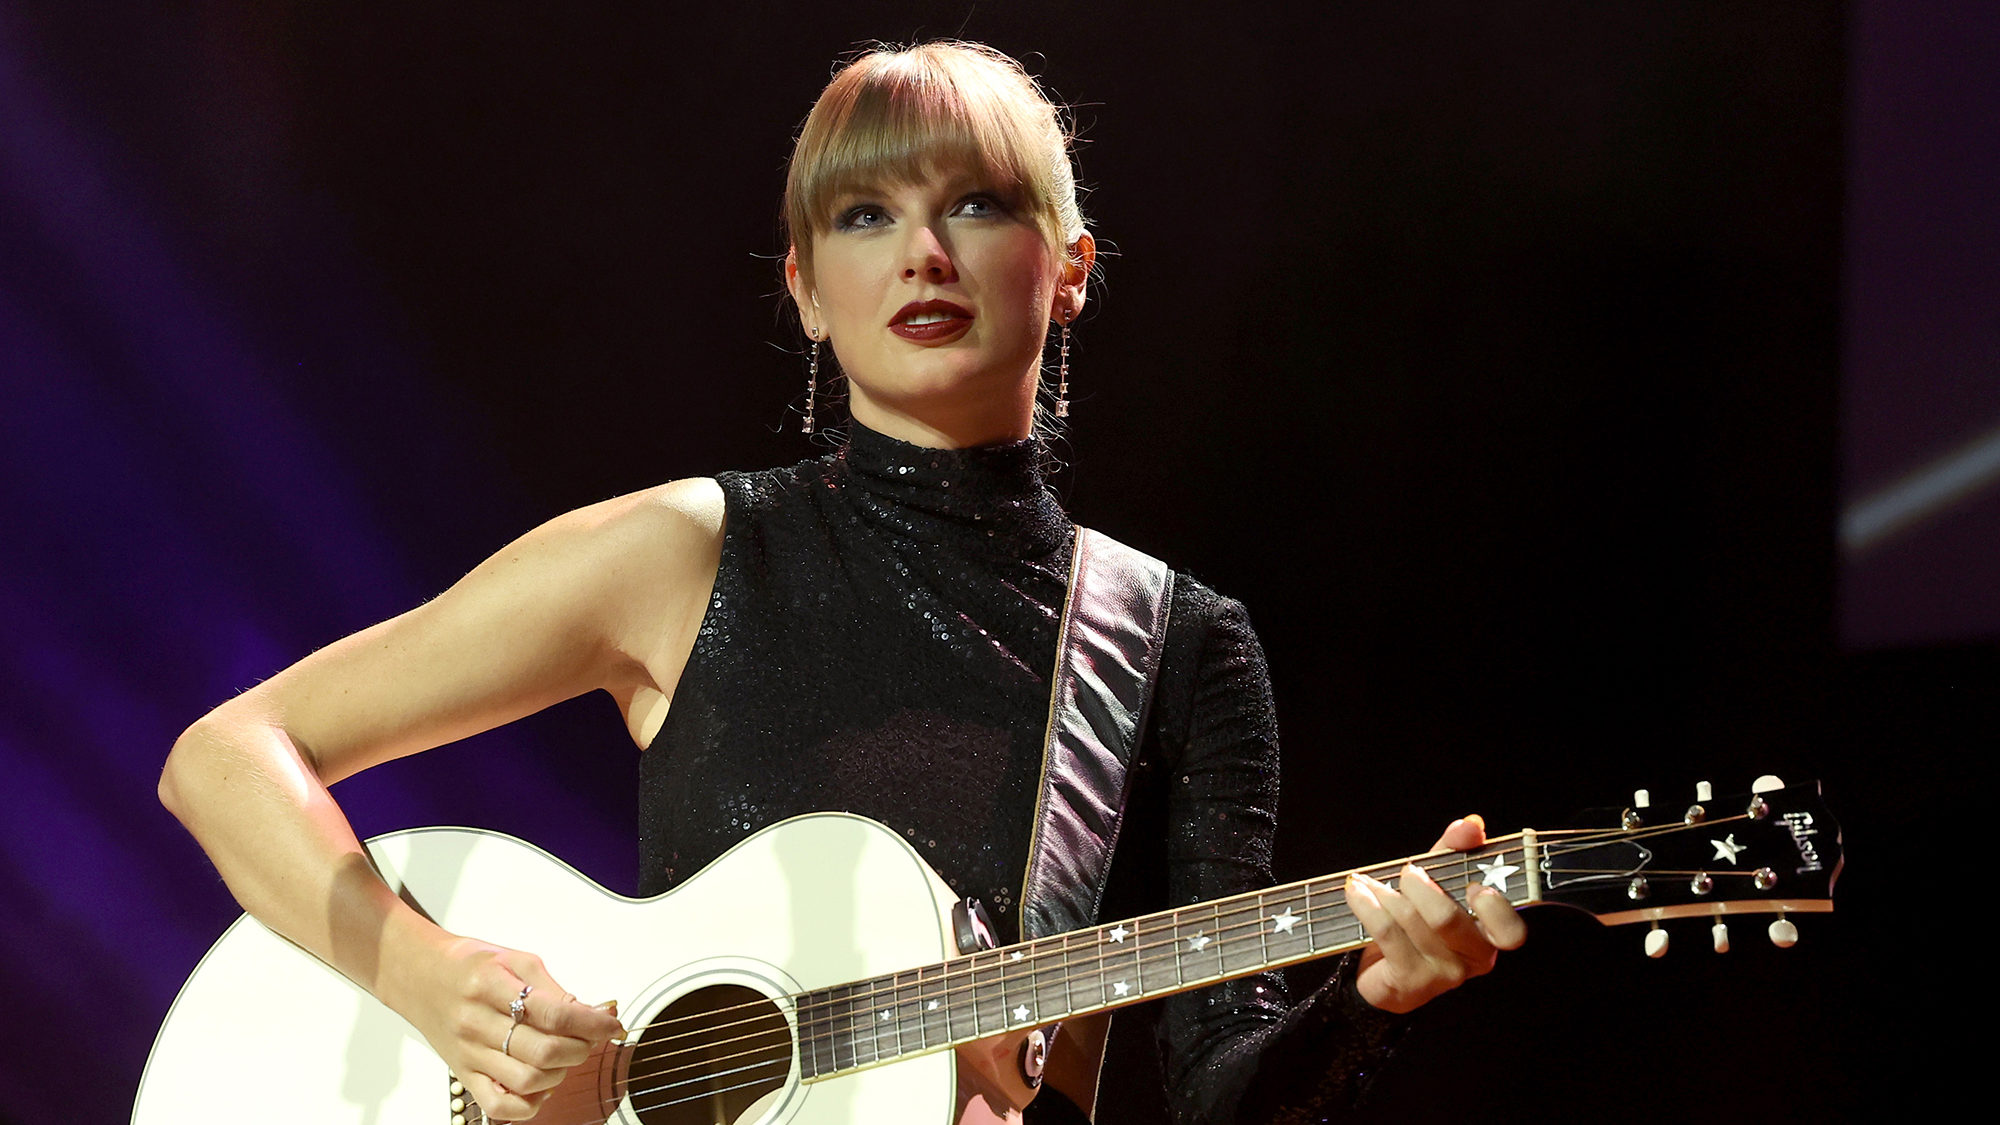 taylor swift is pictured playing a guitar...